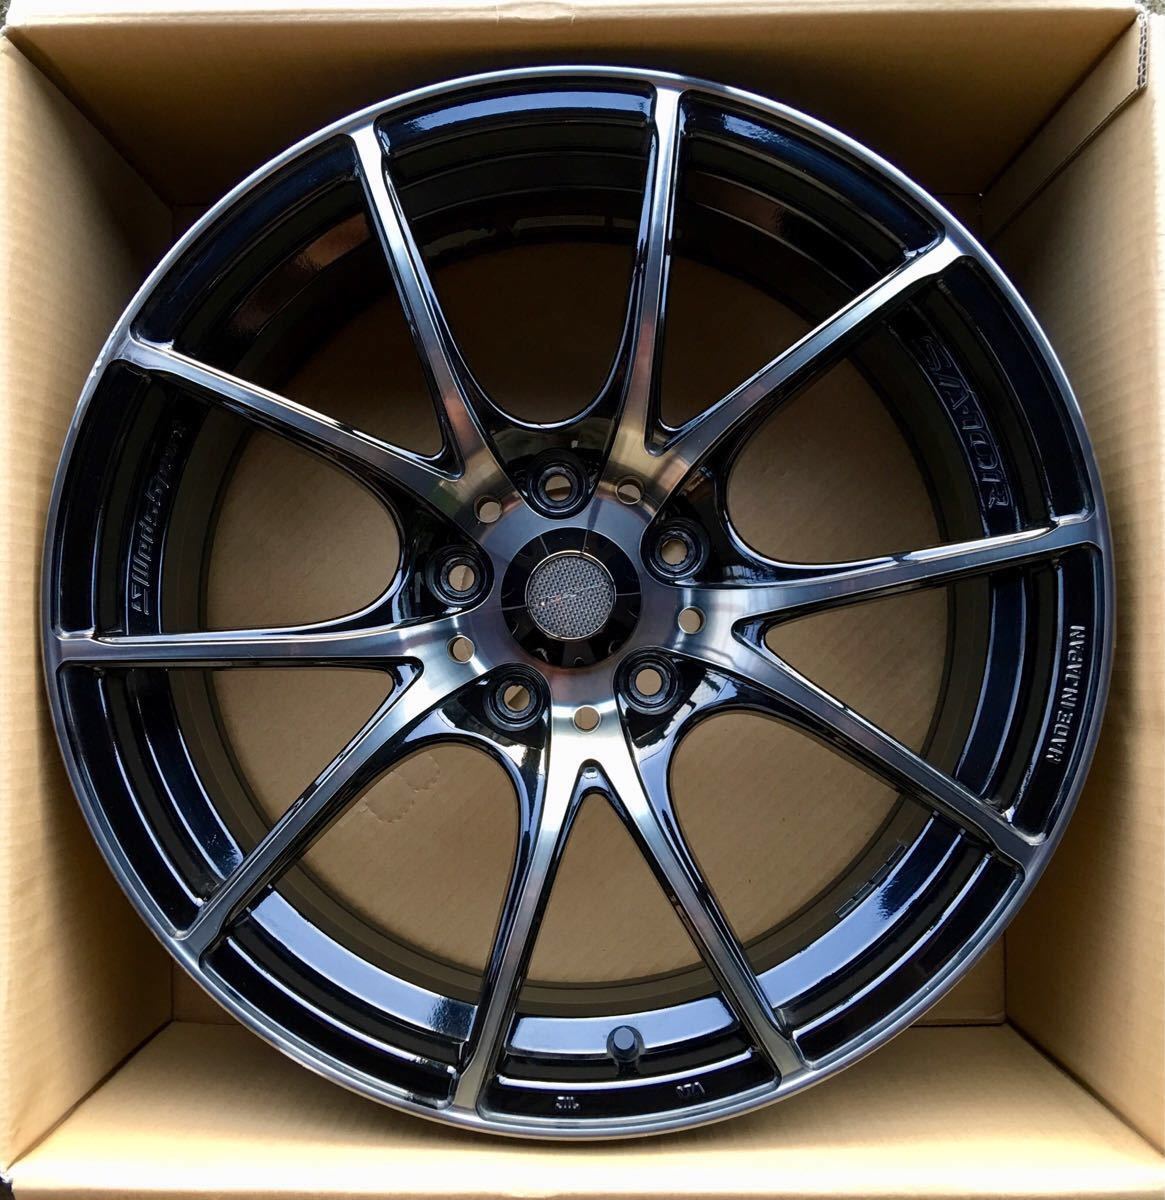 WEDS / Weds Sports / SA-10R 7.5 J插入+ 45安裝節圓直徑（PCD）114.3 mm 原文:WEDS/ウェッズスポーツ/SA-10R 7.5Jインセット+45 取付ピッチ円直径(PCD)114.3mm